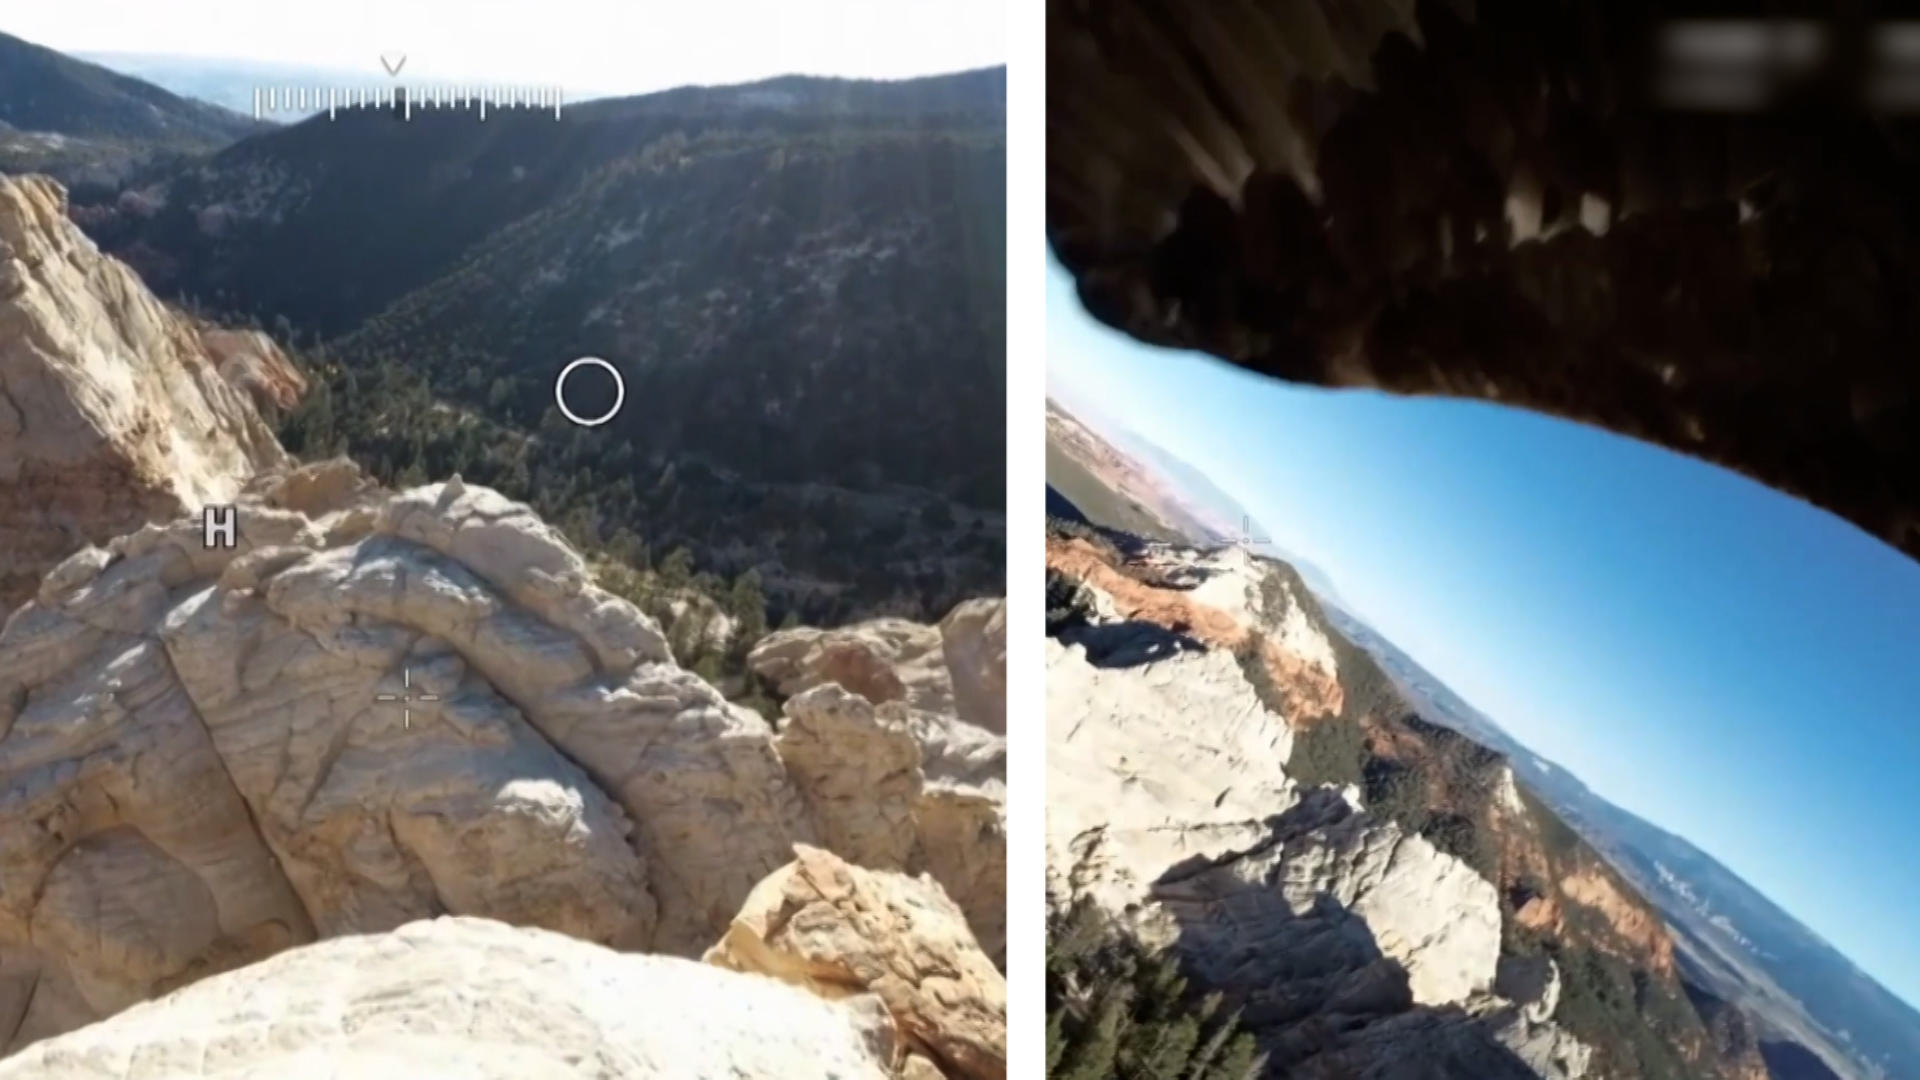 Up in the air!  A bird of prey grabs a drone for an amazing sightseeing flight